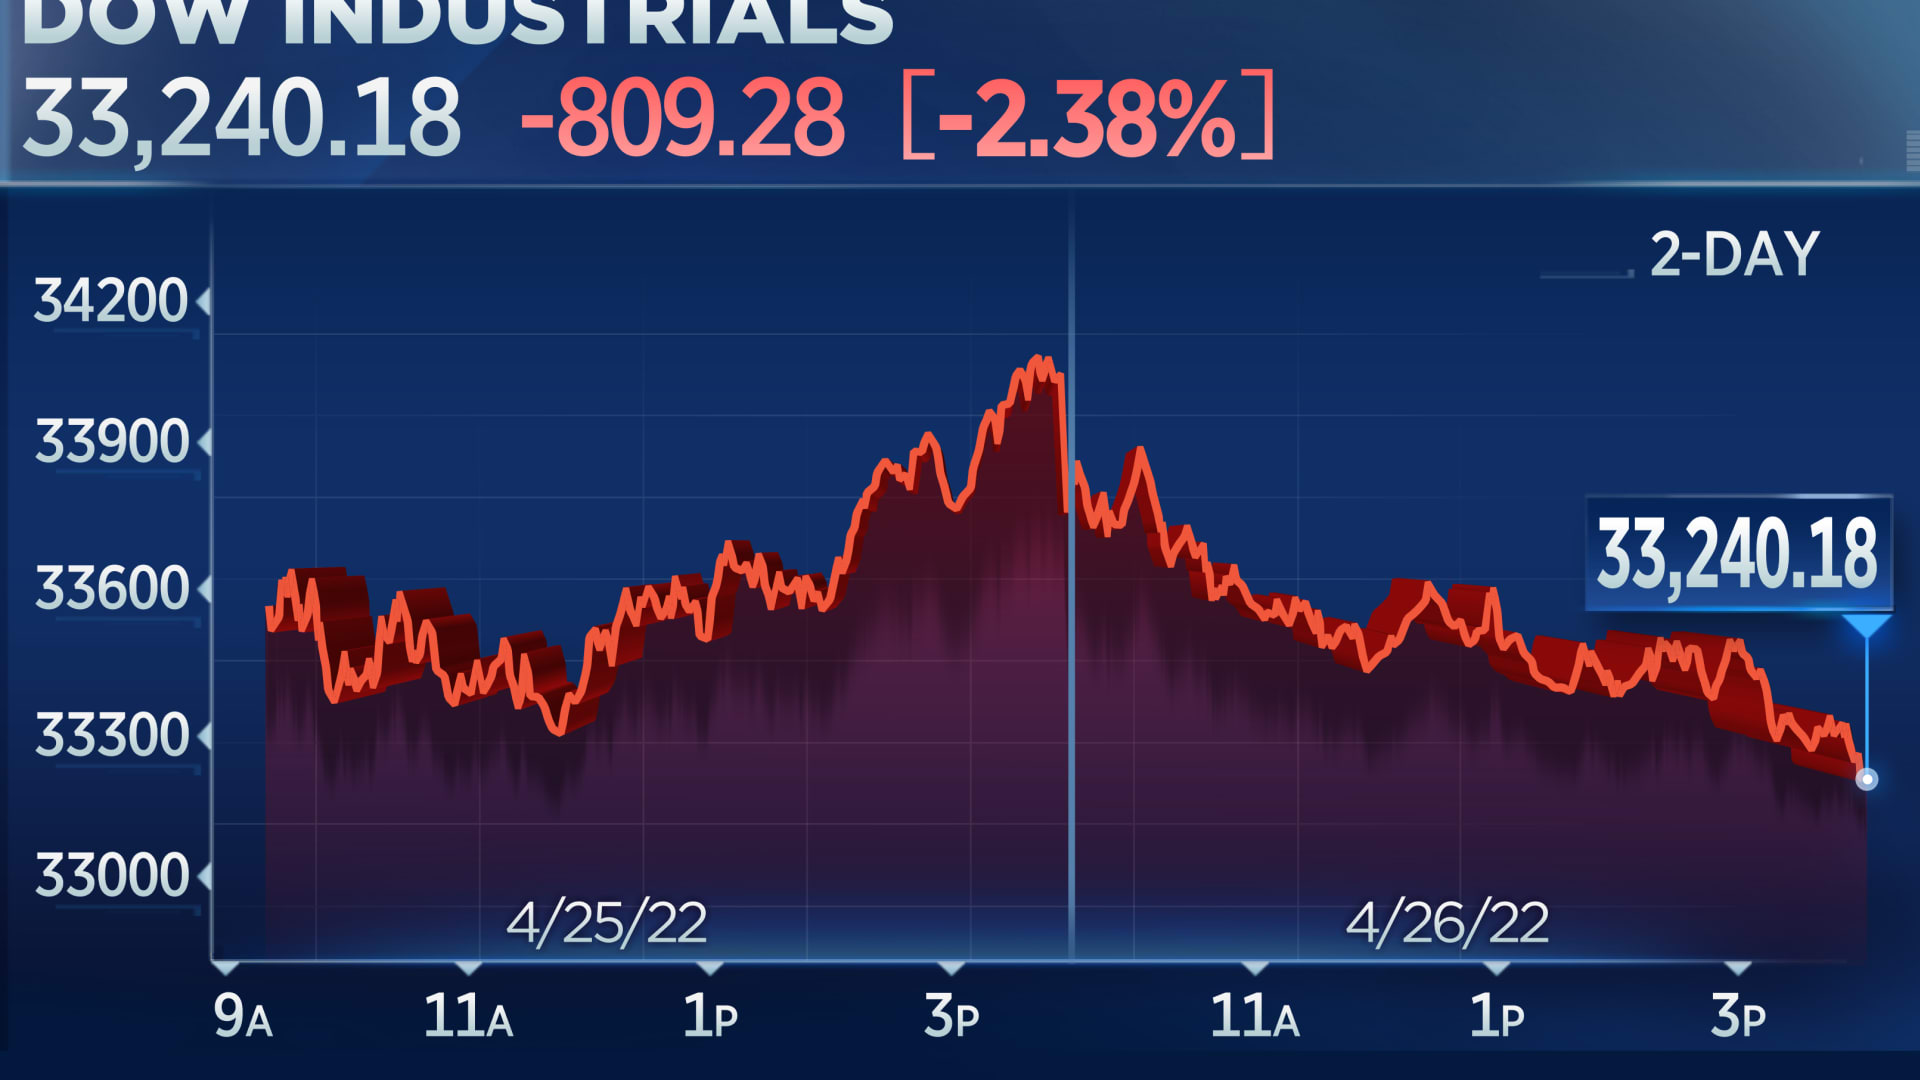 Nasdaq loses nearly 4%, hits fresh low for 2022